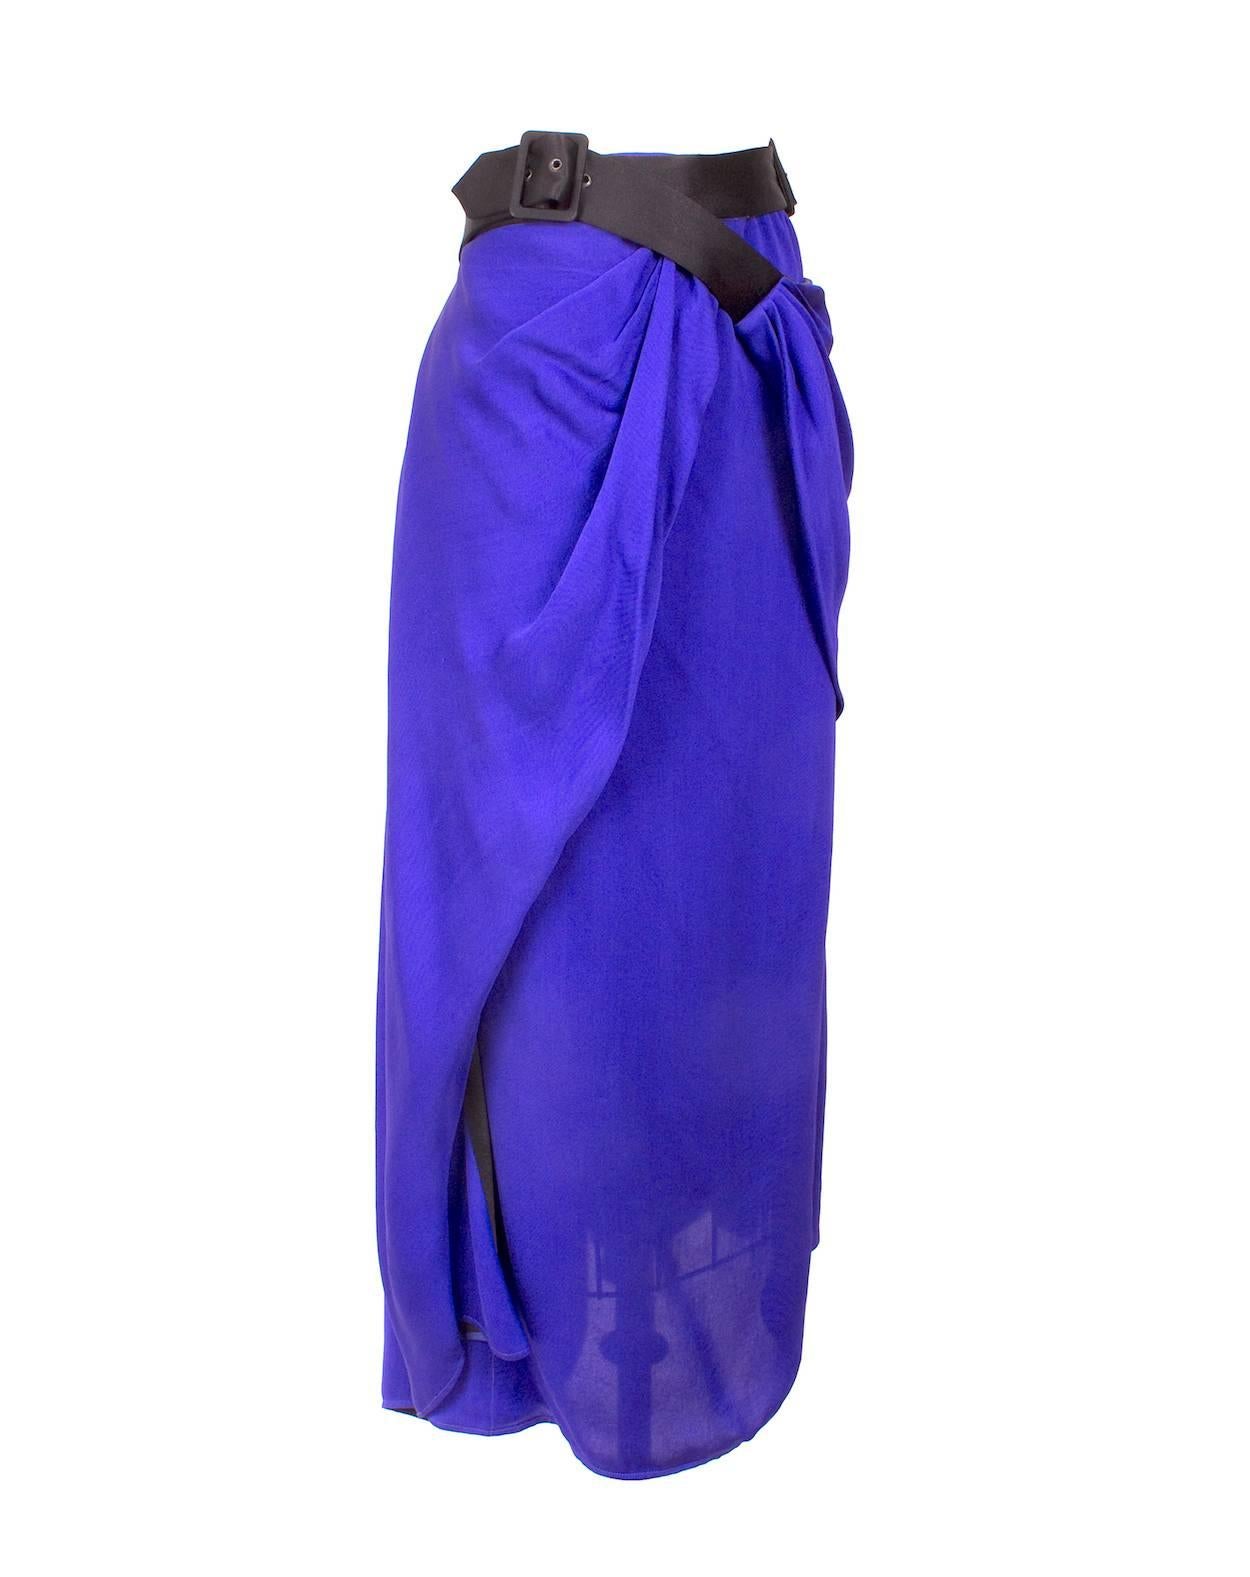 This is a purple silk skirt by Jean Paul Gaultier c. 1990s.  It has a wrap around design with a black belt and prong buckles.